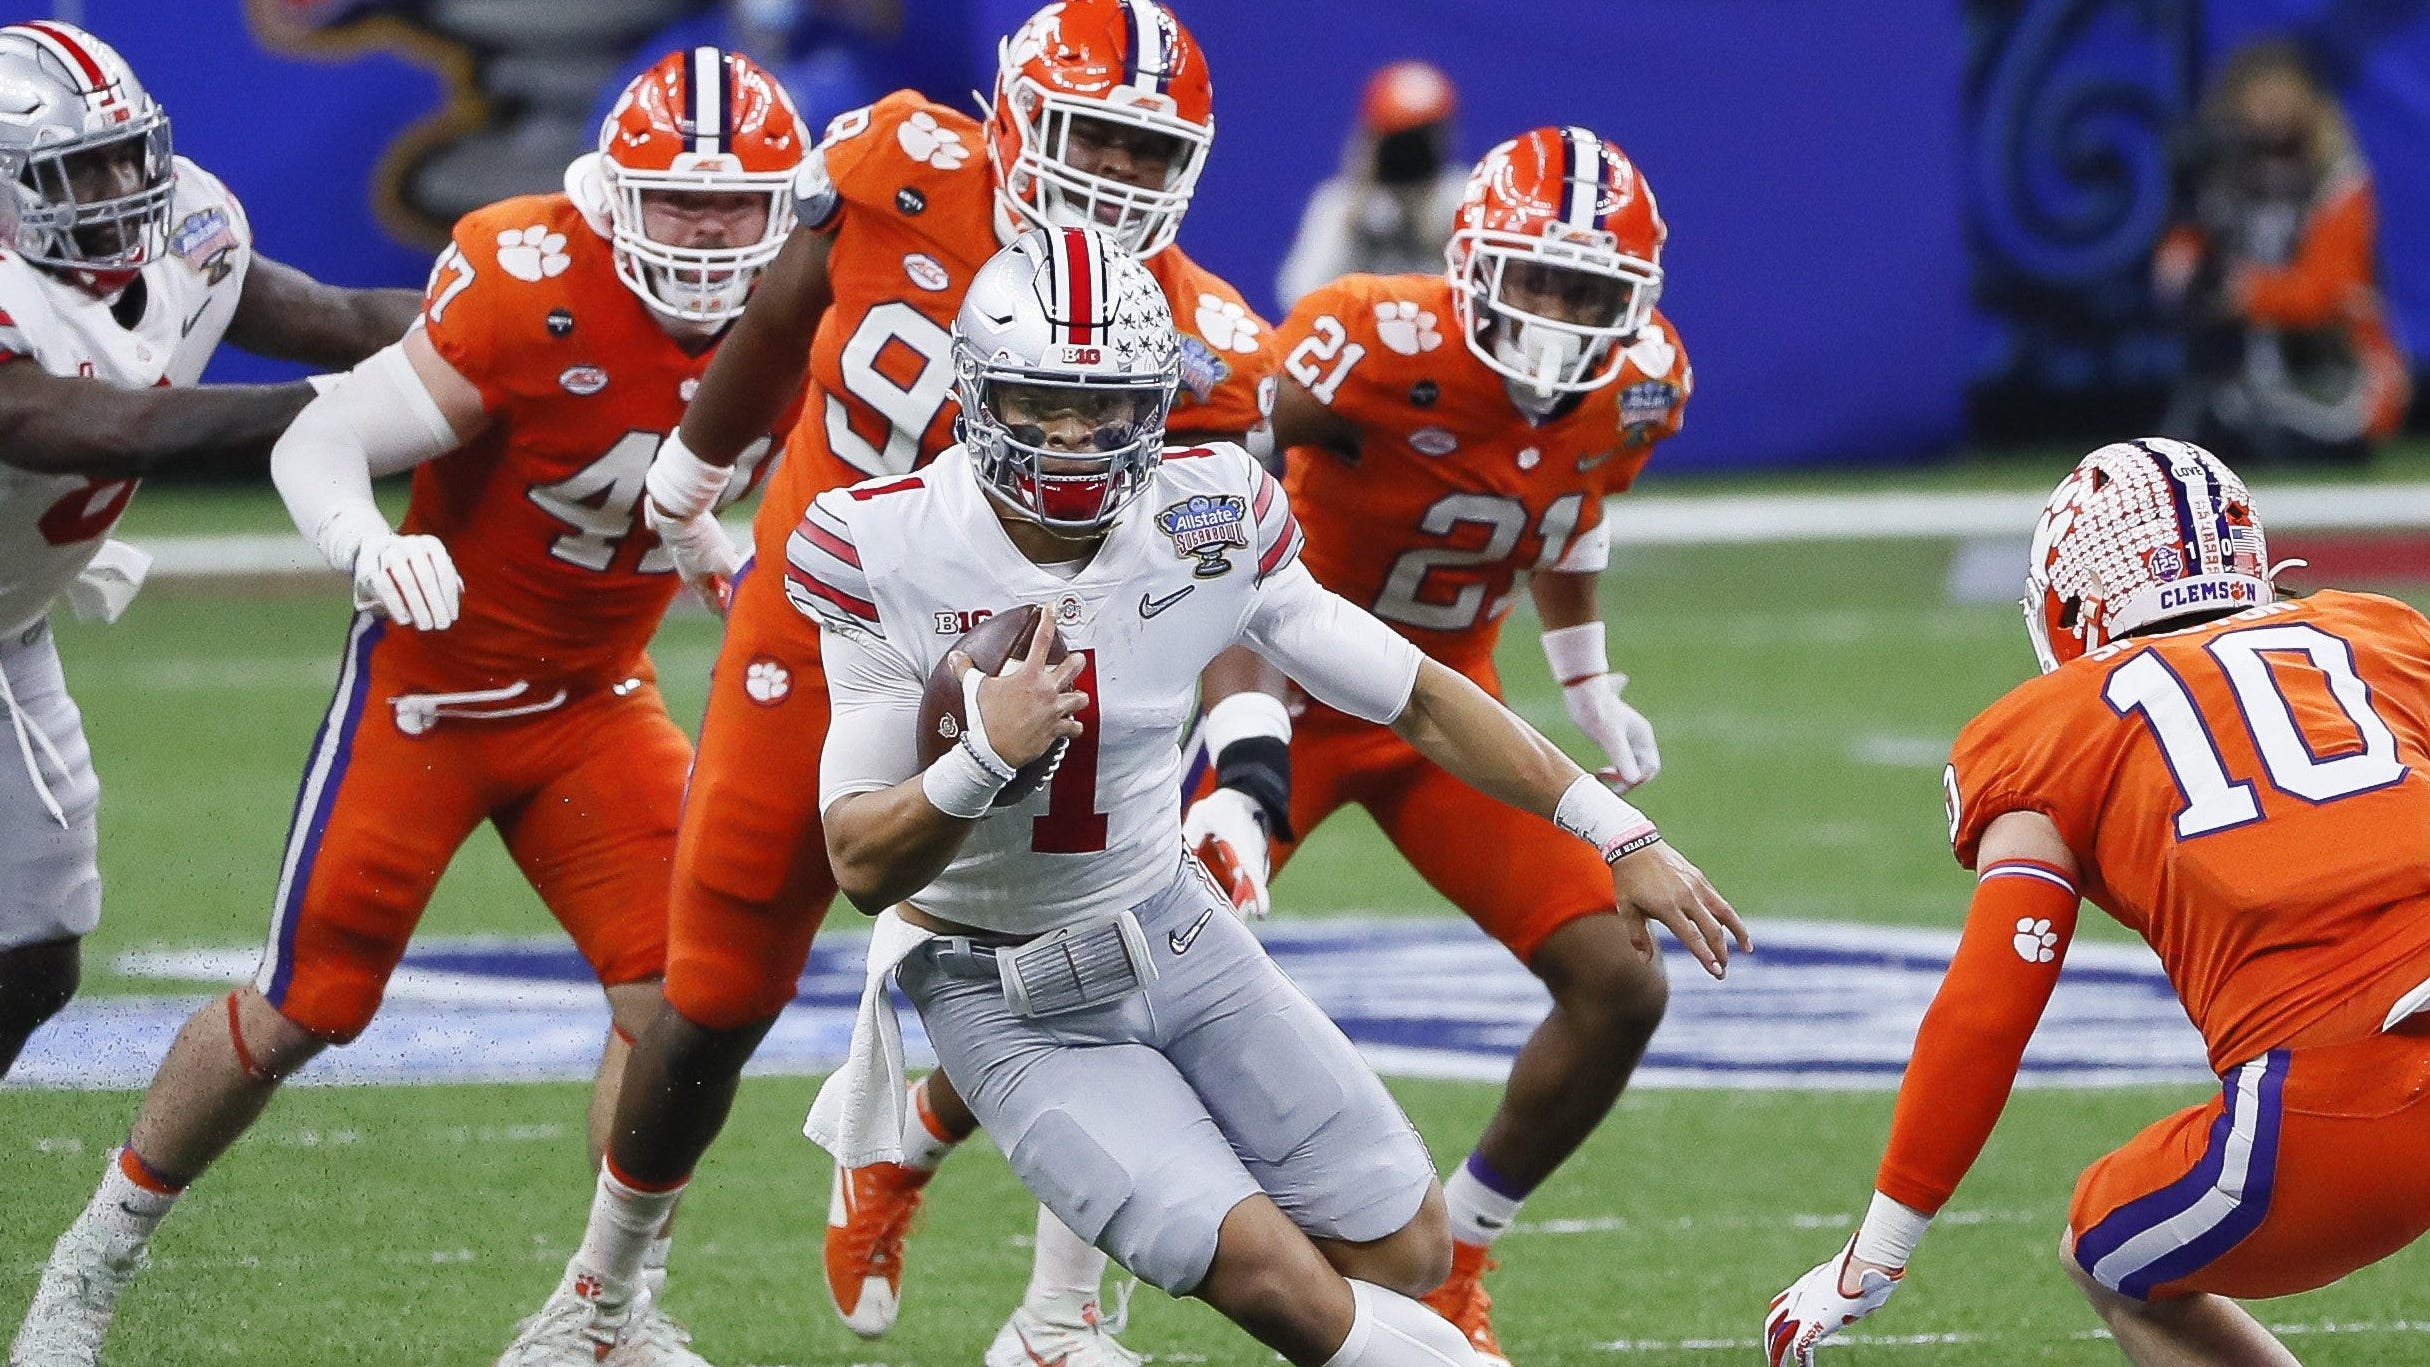 Ohio State quarterback Justin Fields rushes during the College Football Playoff semifinal against Clemson at the Allstate Sugar Bowl in the Mercedes-Benz Superdome in New Orleans on Jan. 1, 2021.